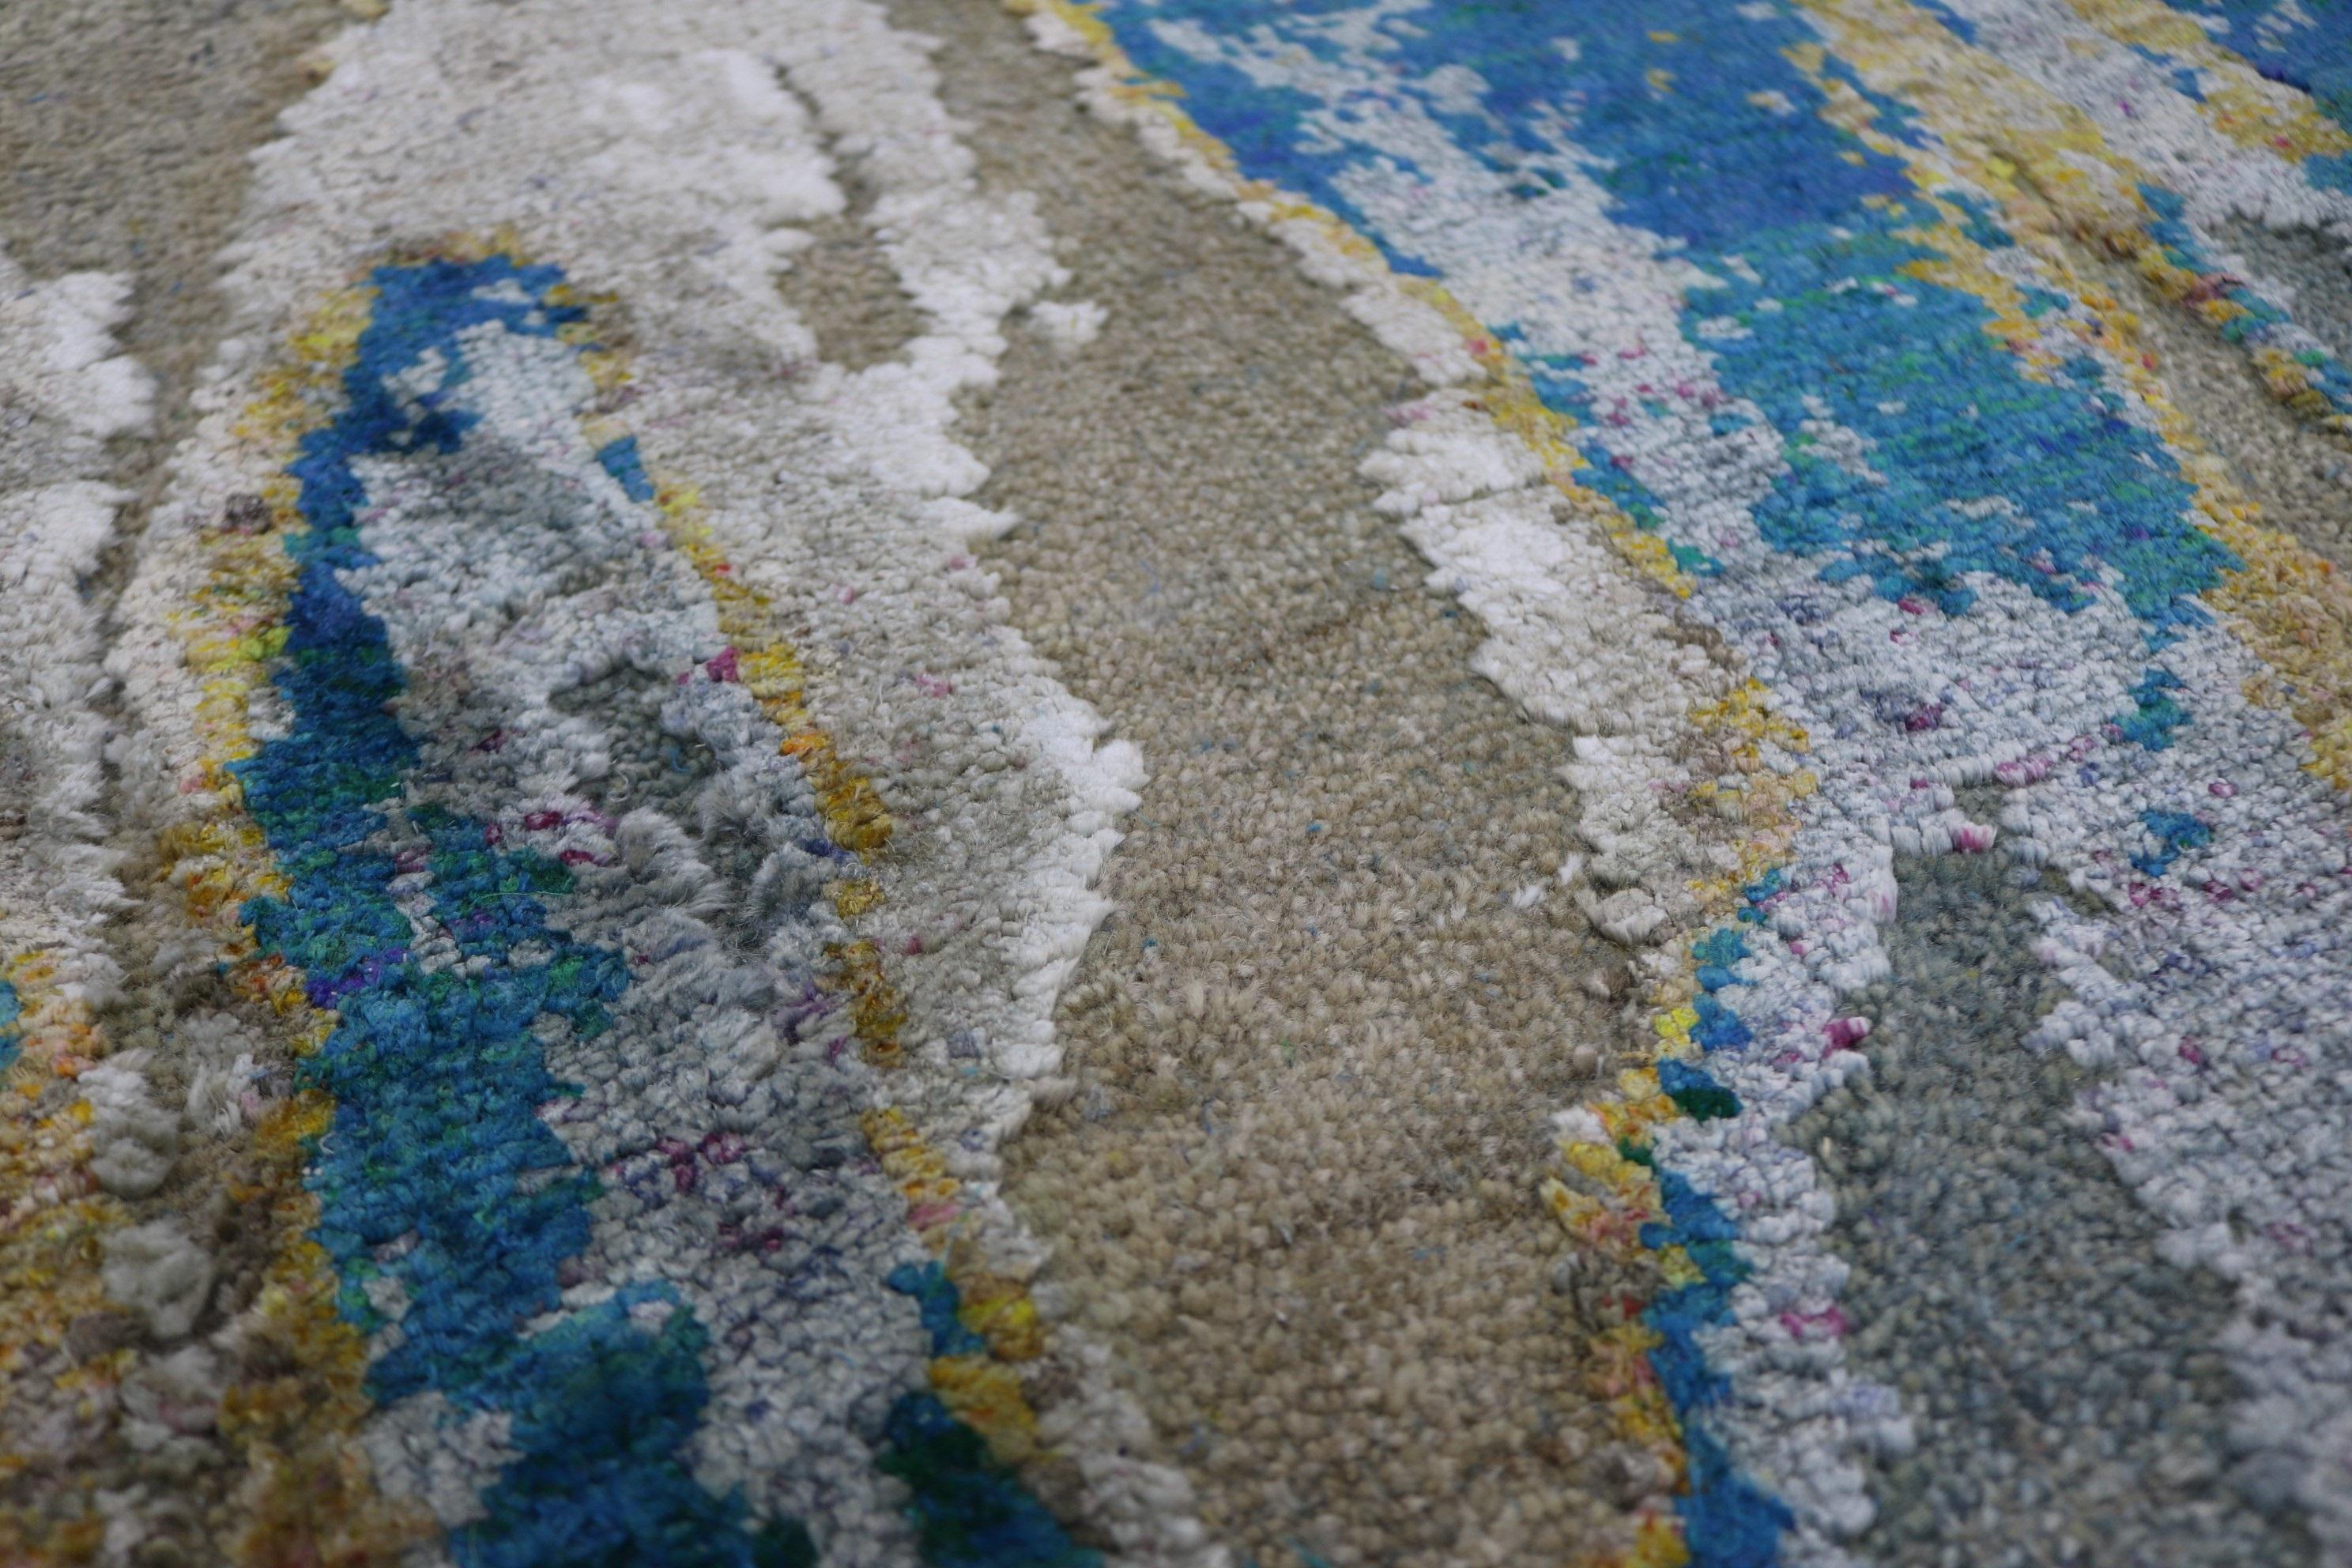 The Odyssey collection a breakthrough, three dimensional and multi textural rug collection, inspired by NASA imagery. Distressed wool and natural silk are hand knotted to create three levels of visual and tactile finery. The collection pairs vintage